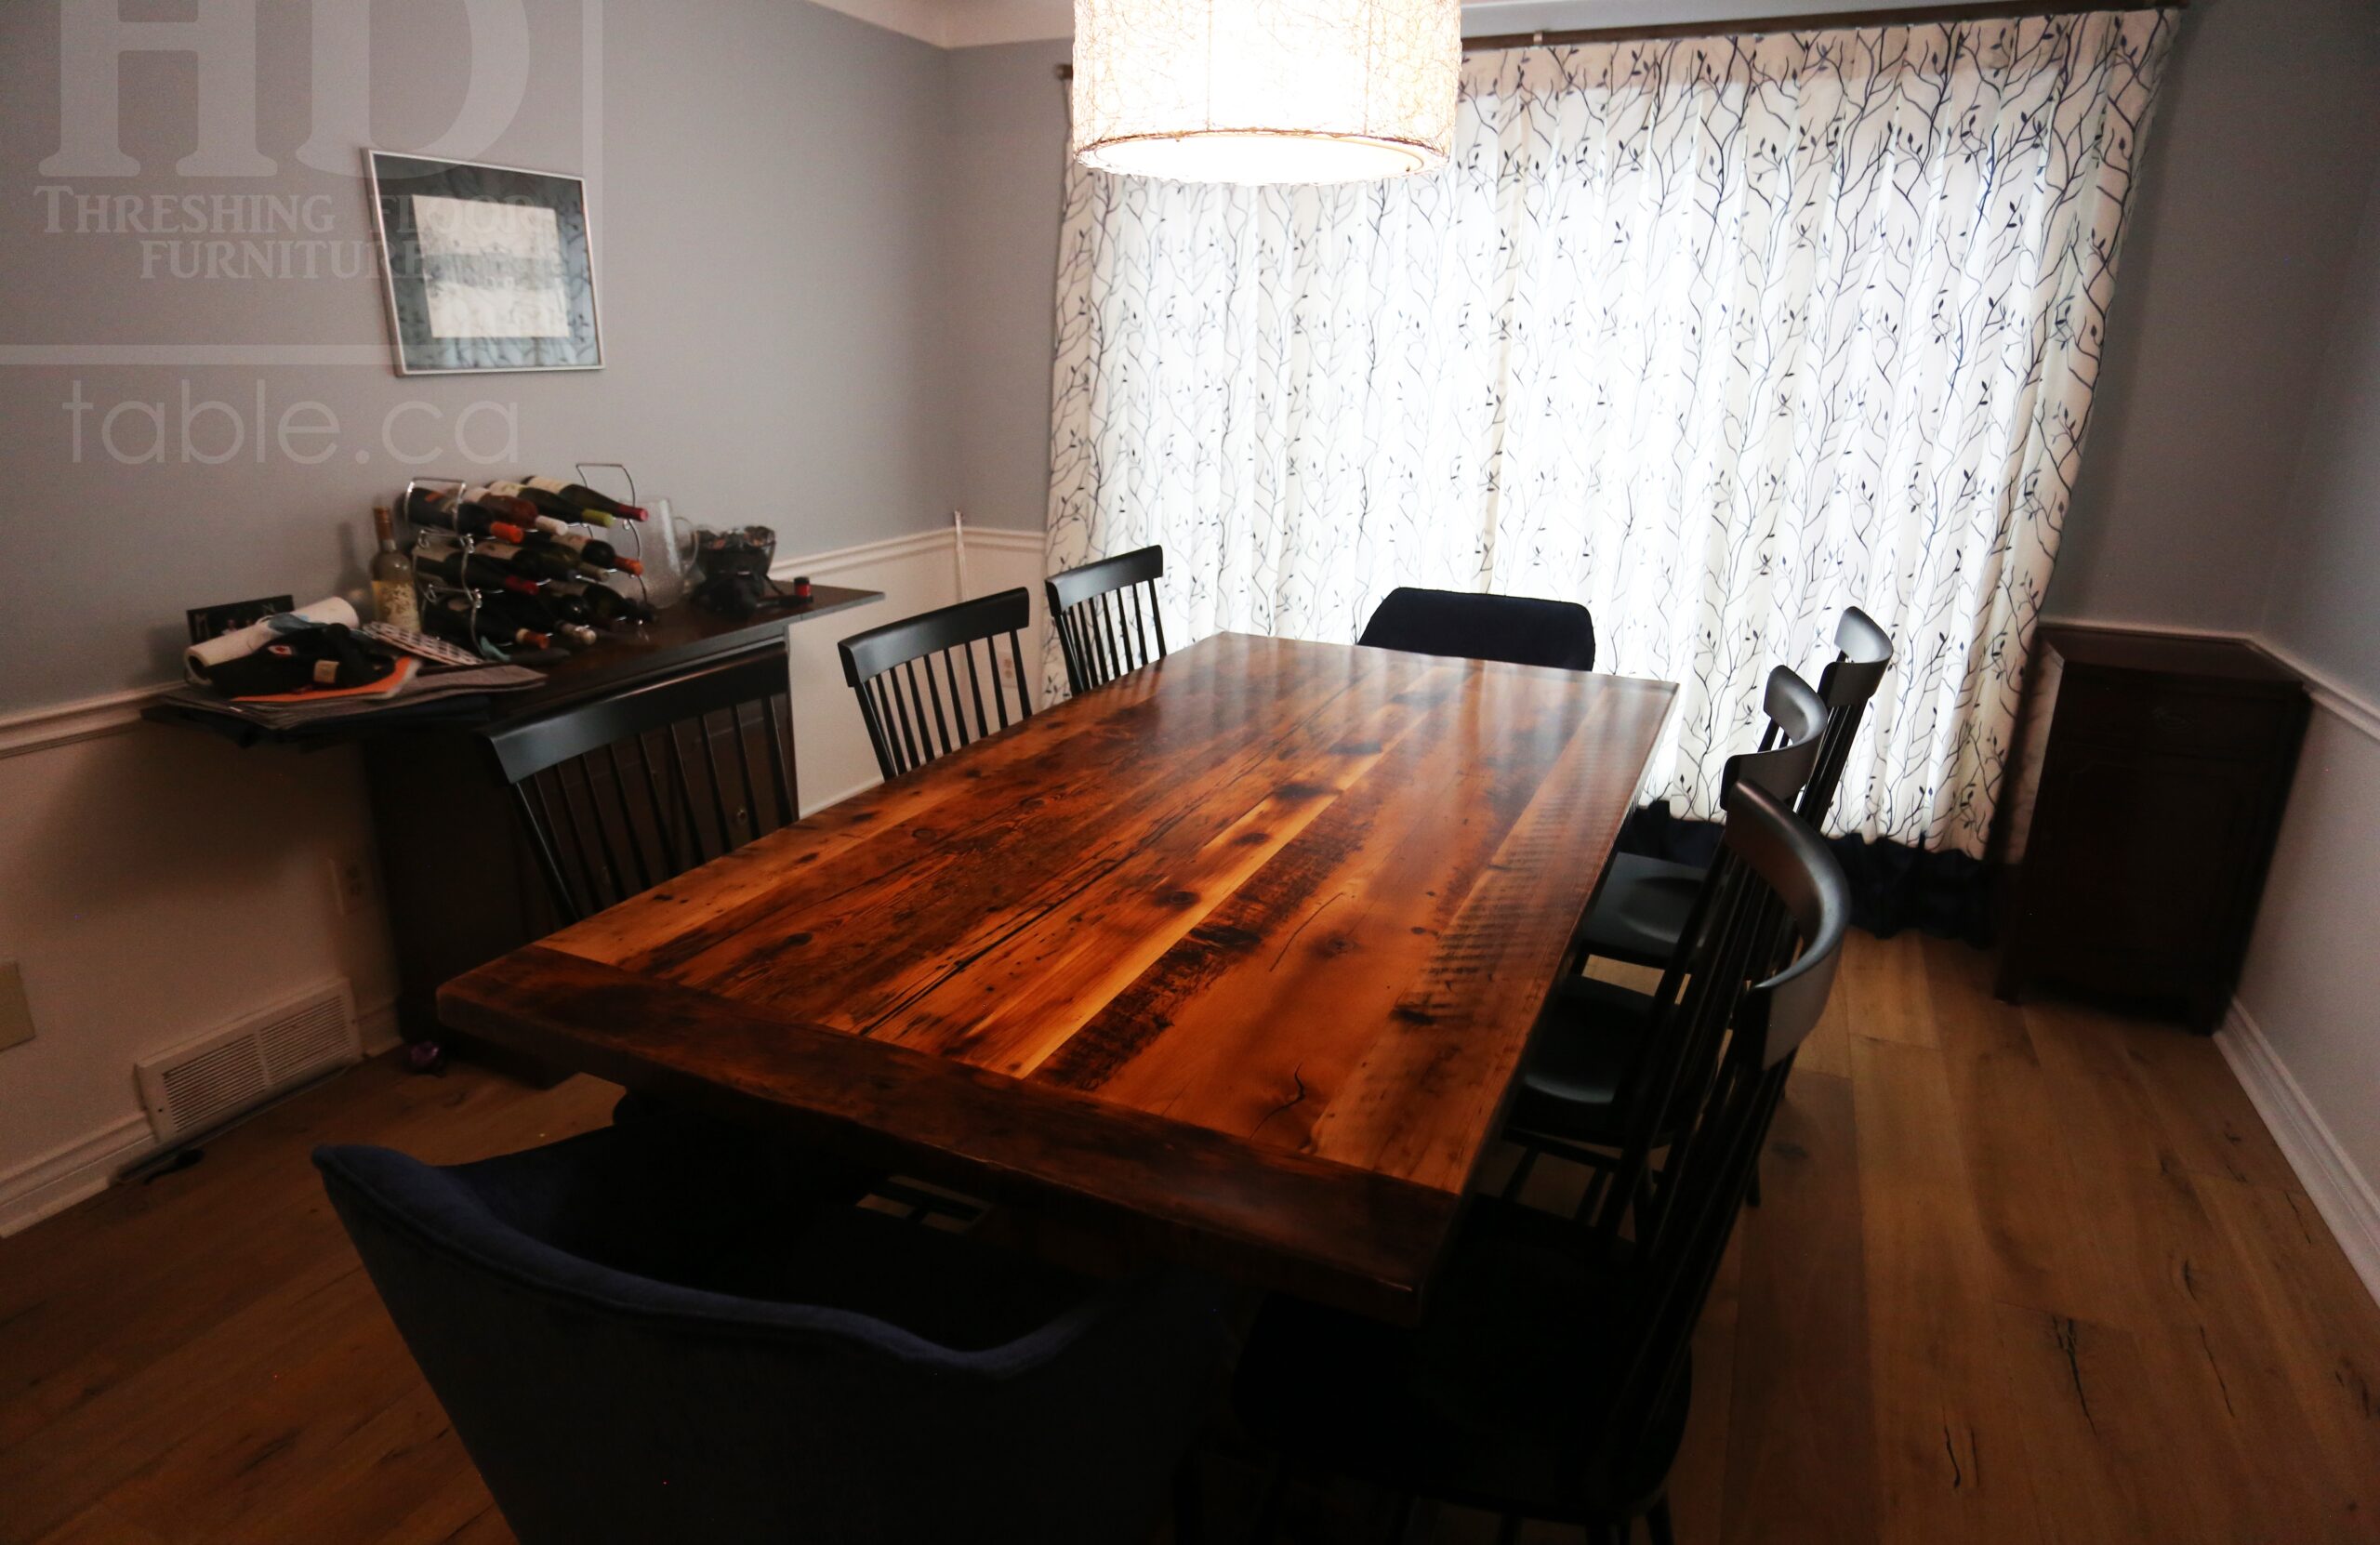 7' Ontario Barnwood Boardroom Table we made for a St. Catherines, Ontario Home â€“ Sawbuck Base - Old Growth Hemlock Threshing Floor Construction - Original Distressing & Edges Maintained - Premium epoxy + satin polyurethane finish â€“ Two 18â€ Leaf Extensions [making total length 10â€™ when extended] â€“ 6 Wormy Maple Shaker Chairs / Painted Solid Black / Satin polyurethane clearcoat finish - www.table.ca